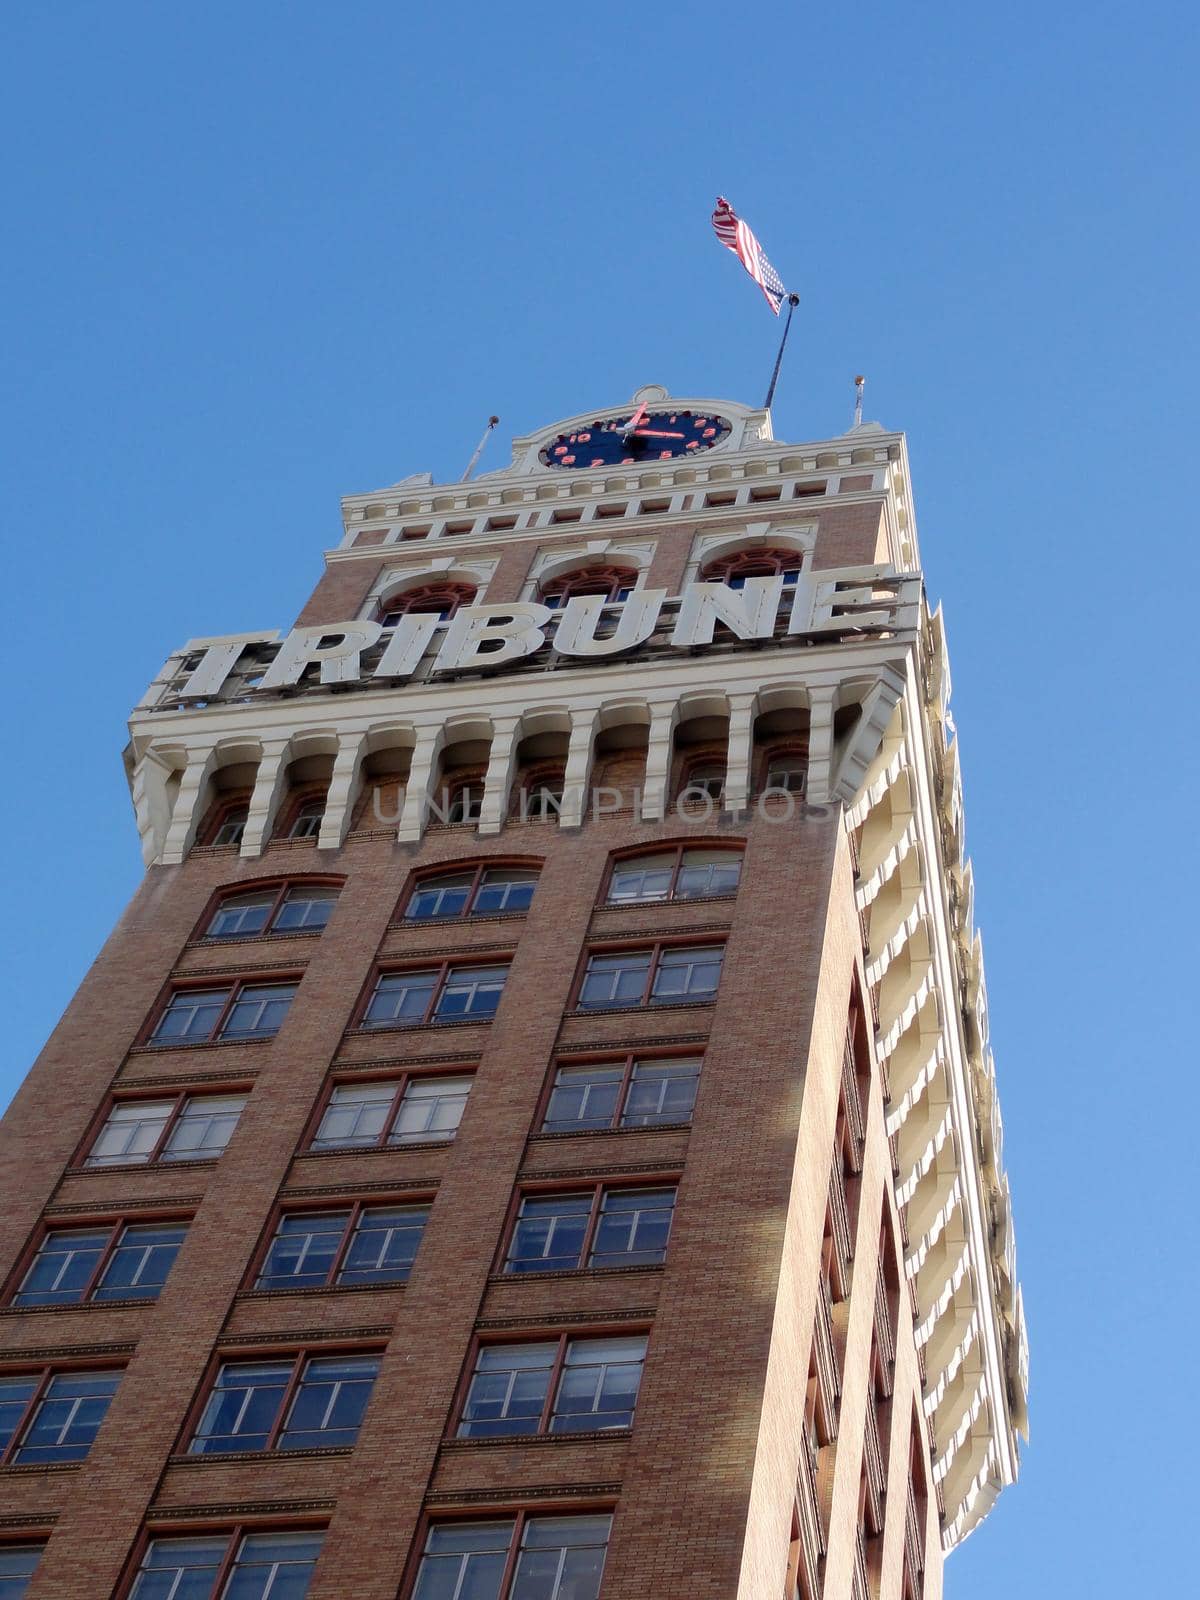 Oakland - February 22, 2011: Oakland Tribune Clock Tower in Downtown Oakland, California.  The Tribune Tower is a 305-ft., 22-story building located in downtown Oakland, California. Built in 1906, tower erected in 1923, the 89,251 sq.-ft. building was the tallest building in Oakland constructed in the 1920s. It is currently the 11th tallest building in Oakland.